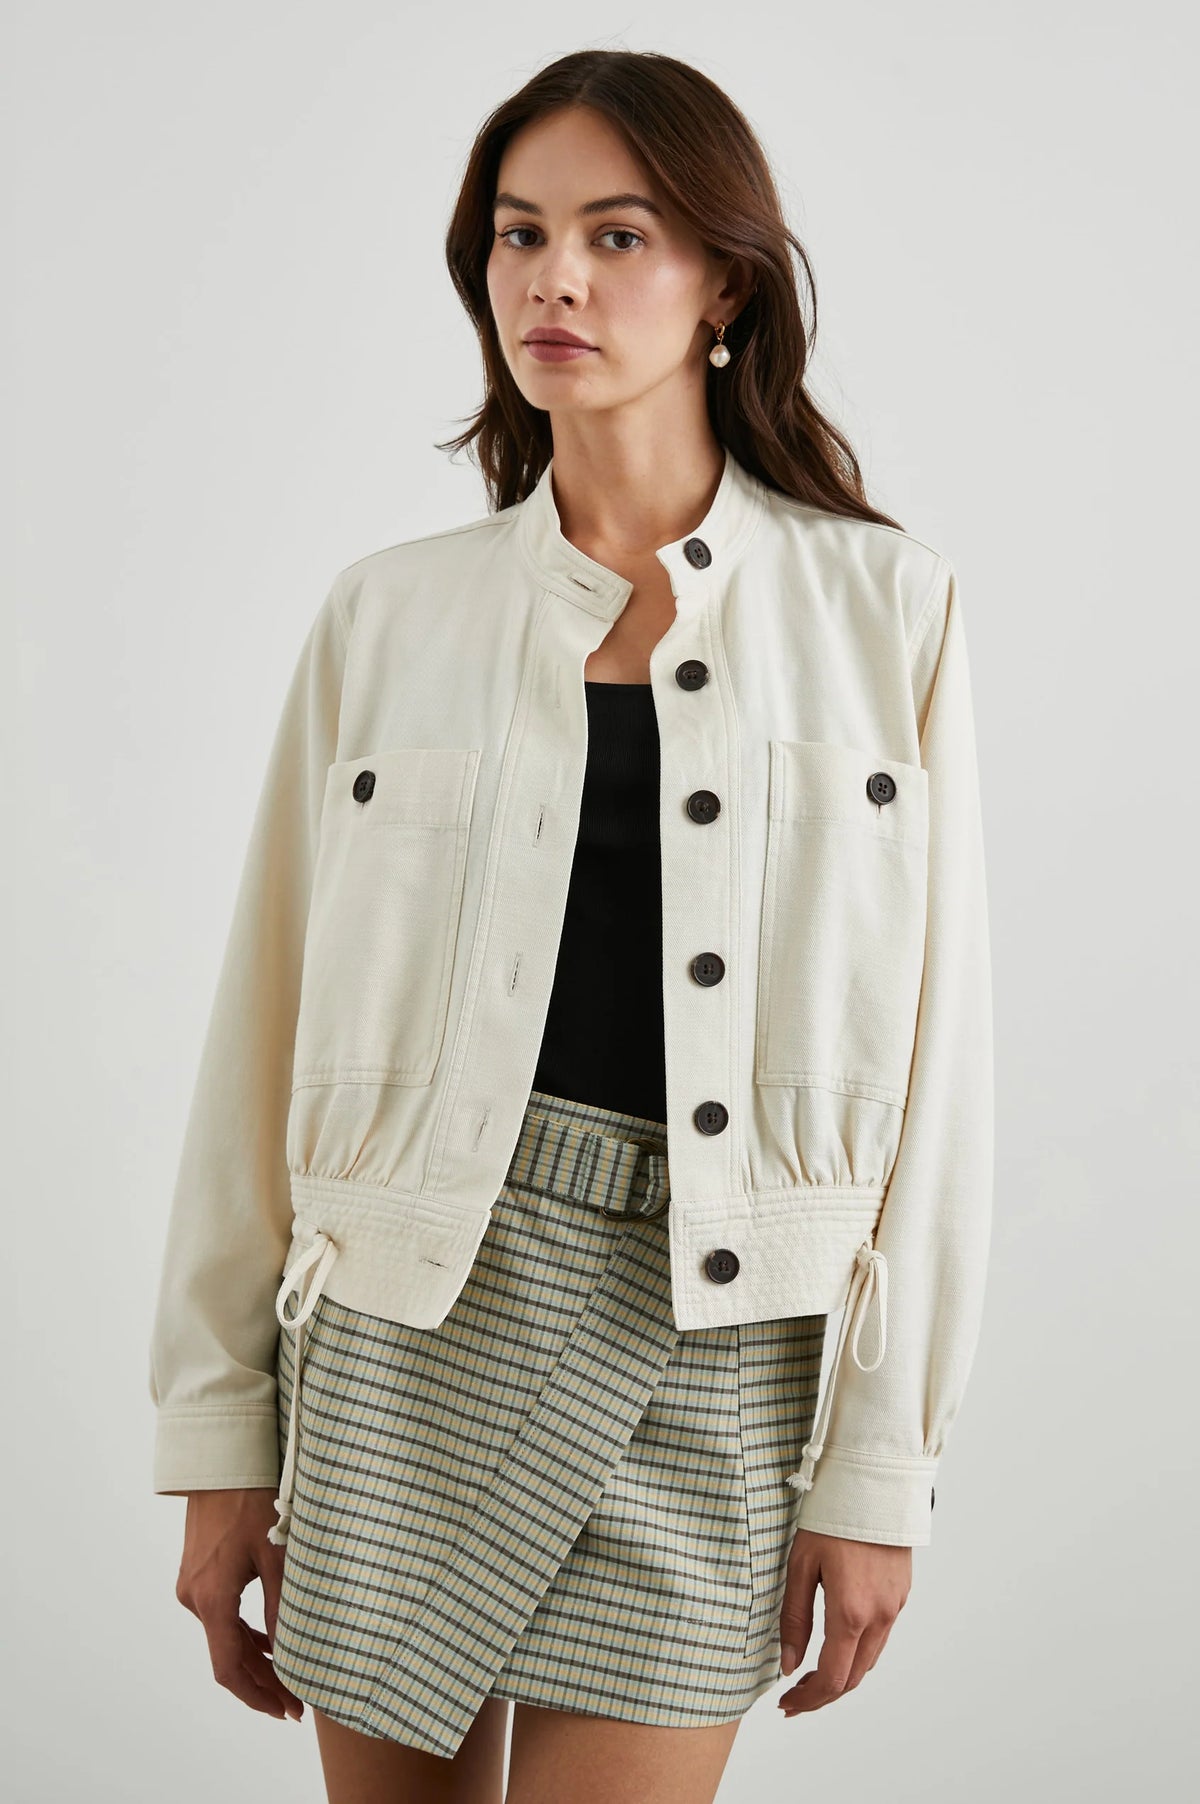 Ecru short button fastened jacket with contrast black buttons and drawstring waist